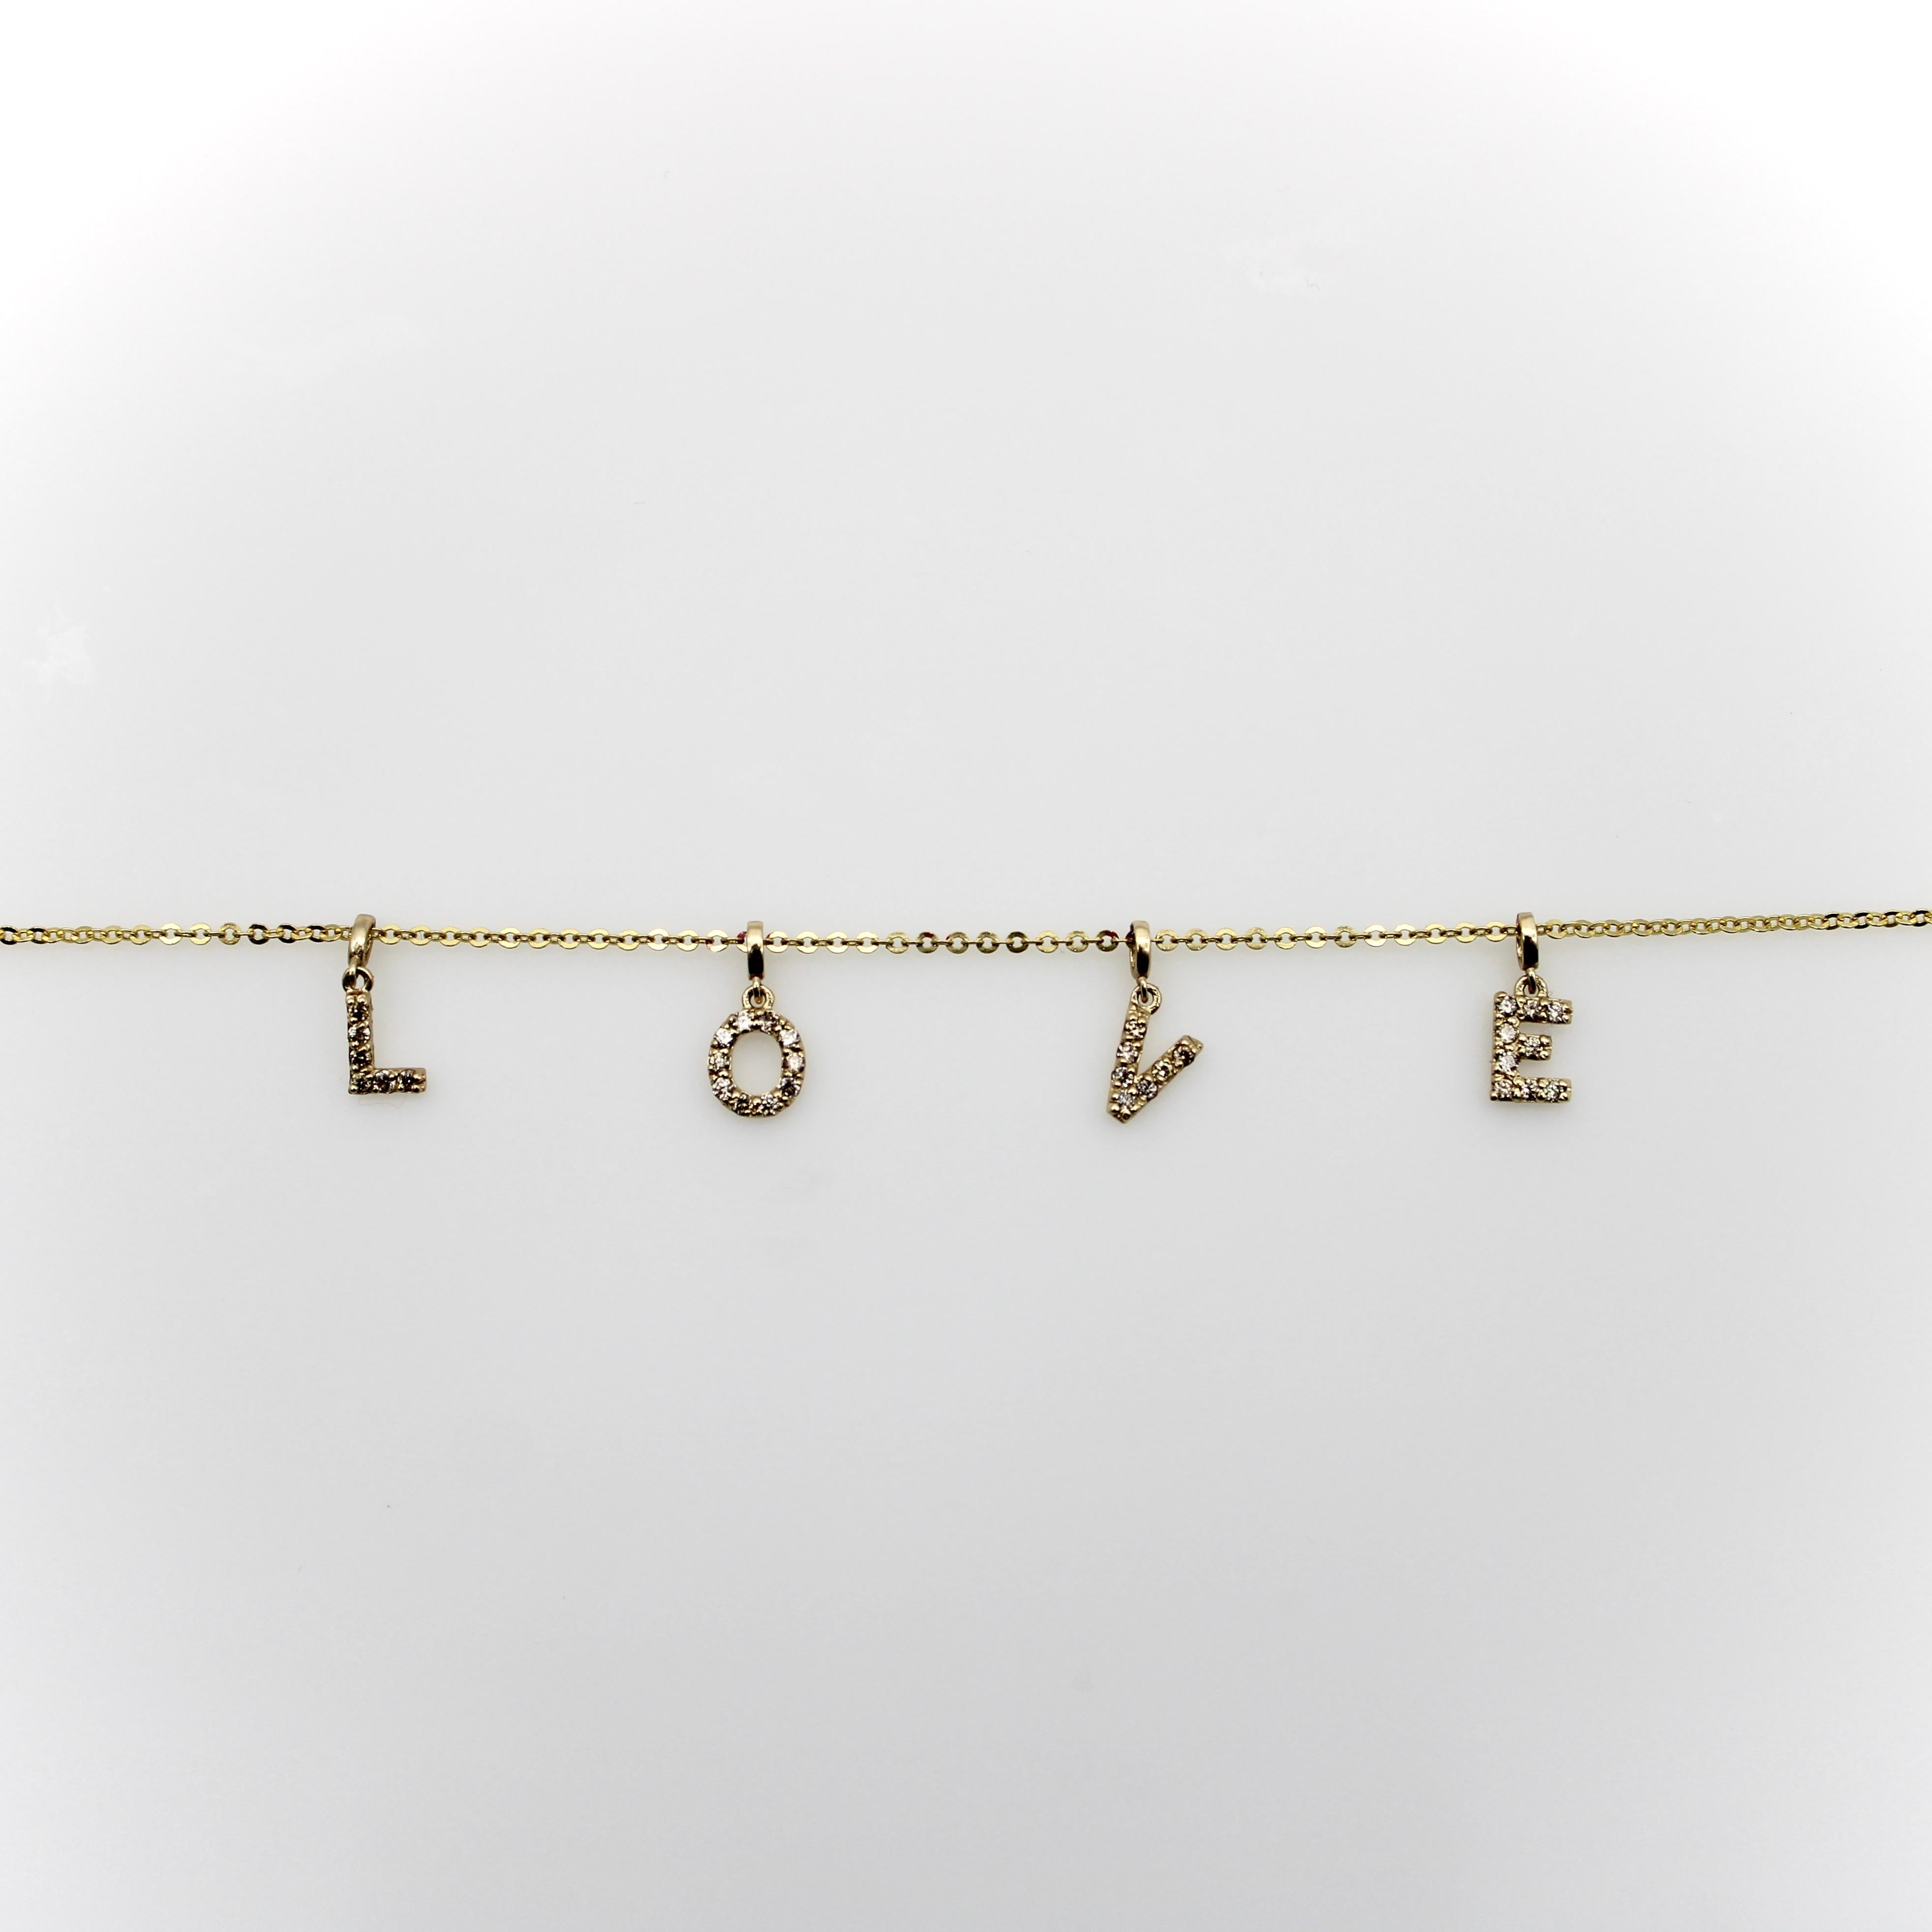 Suspended on a delicate 14k gold chain are 4 micro pave diamond letters that spell the word LOVE. The letters are spaced close enough together so that the word love is easy to read, but with enough width between them to allow the letters to dangle